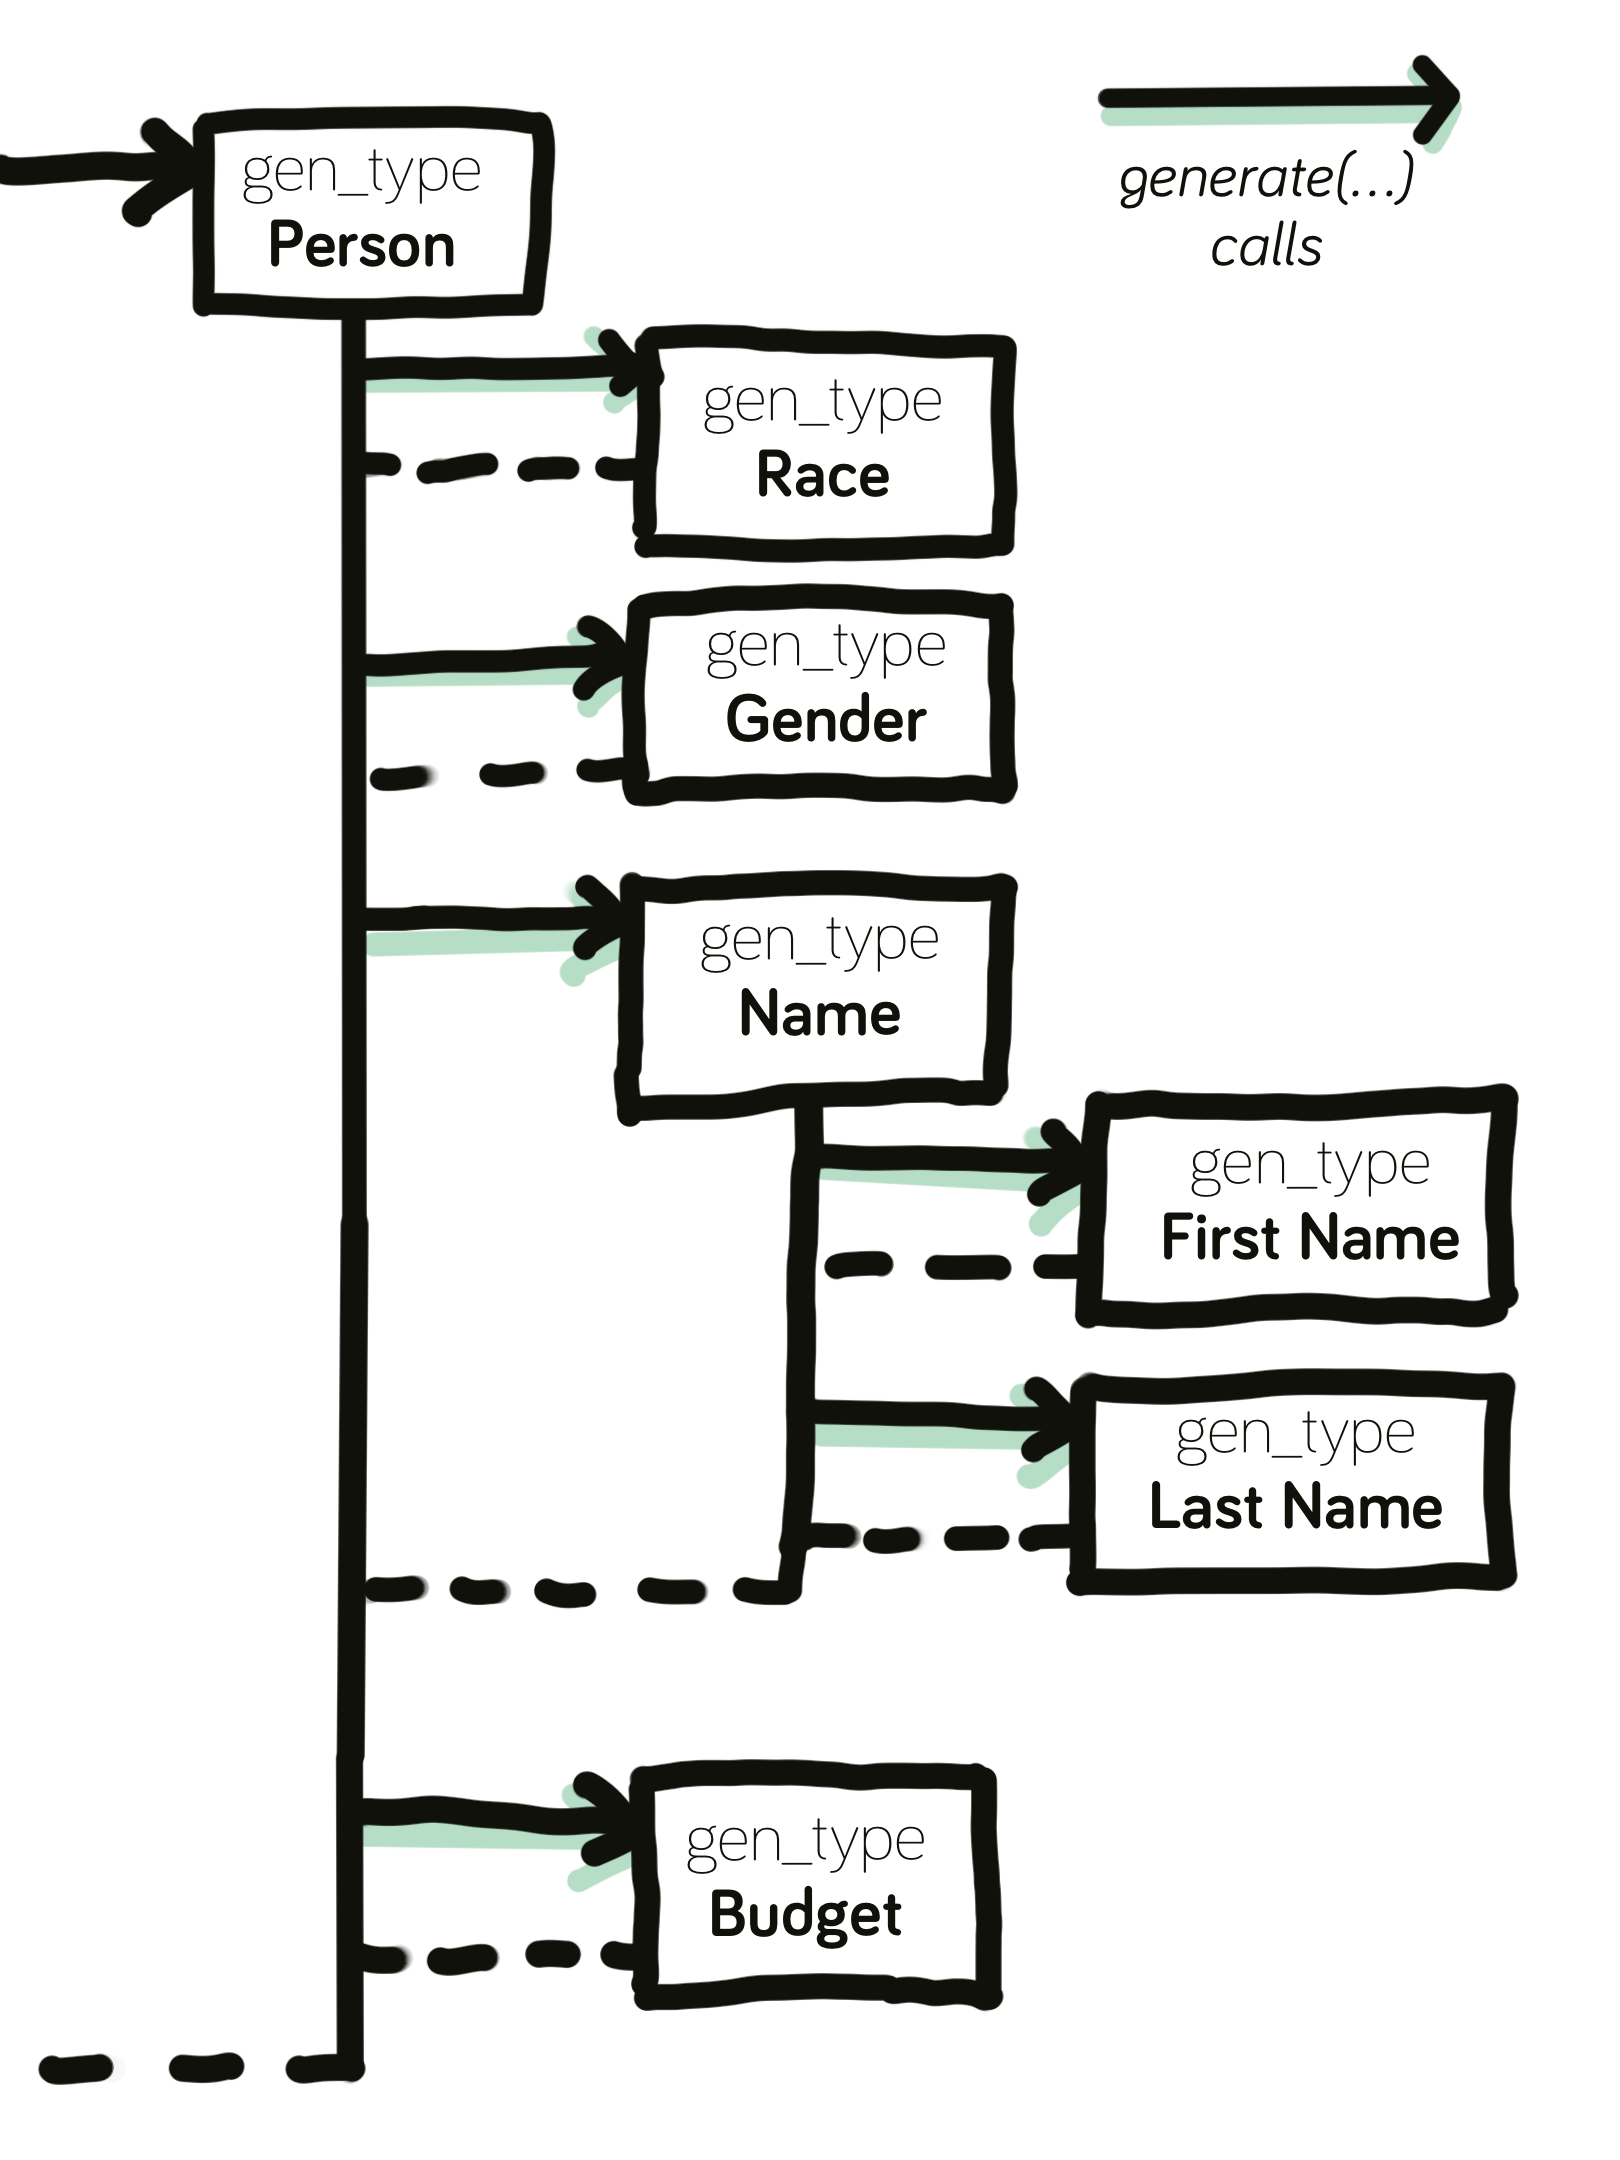 Simplified control flow of the Person type generation. Every aspect of the person is outsourced into its own gen_type.